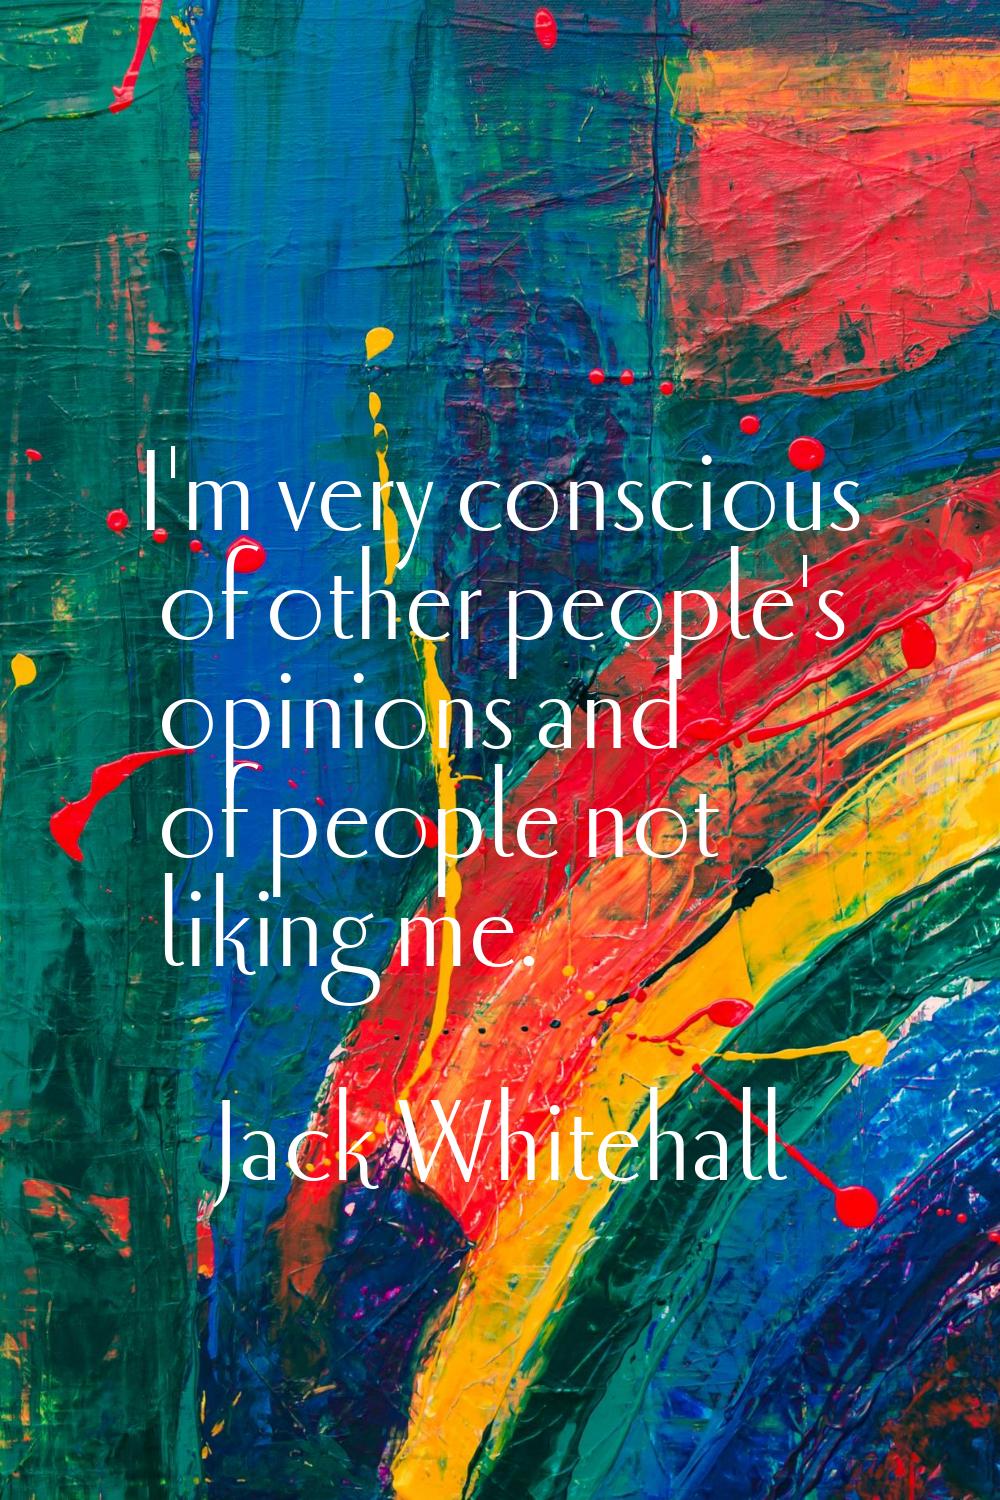 I'm very conscious of other people's opinions and of people not liking me.